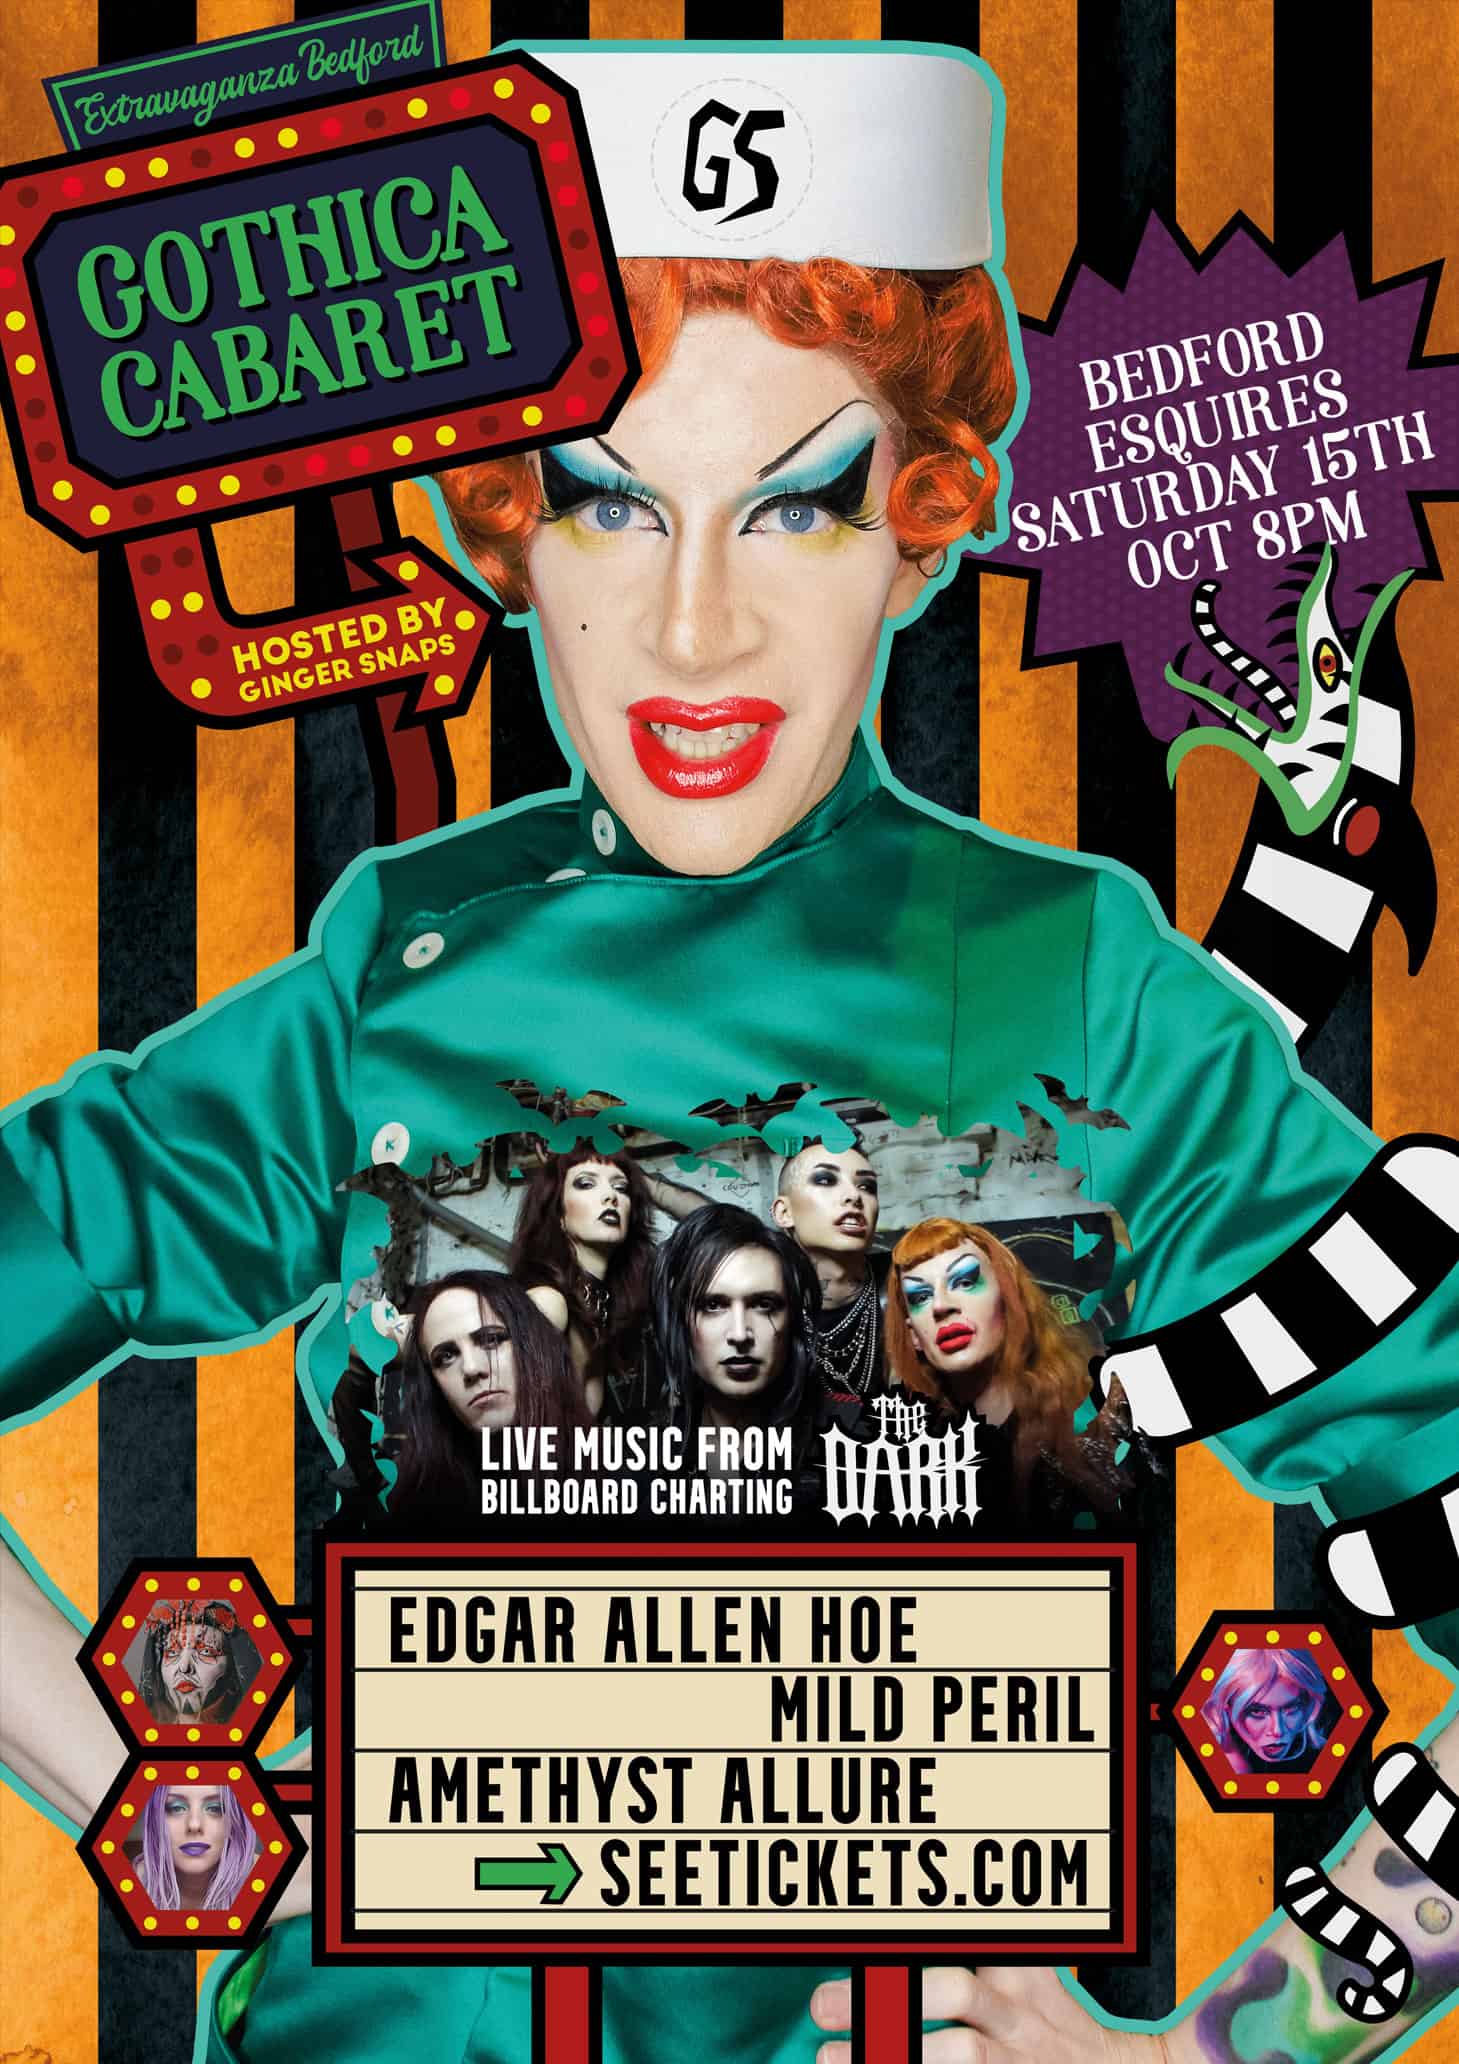 Extravaganza Bedford Poster - Attitude Live Music and Cabaret 